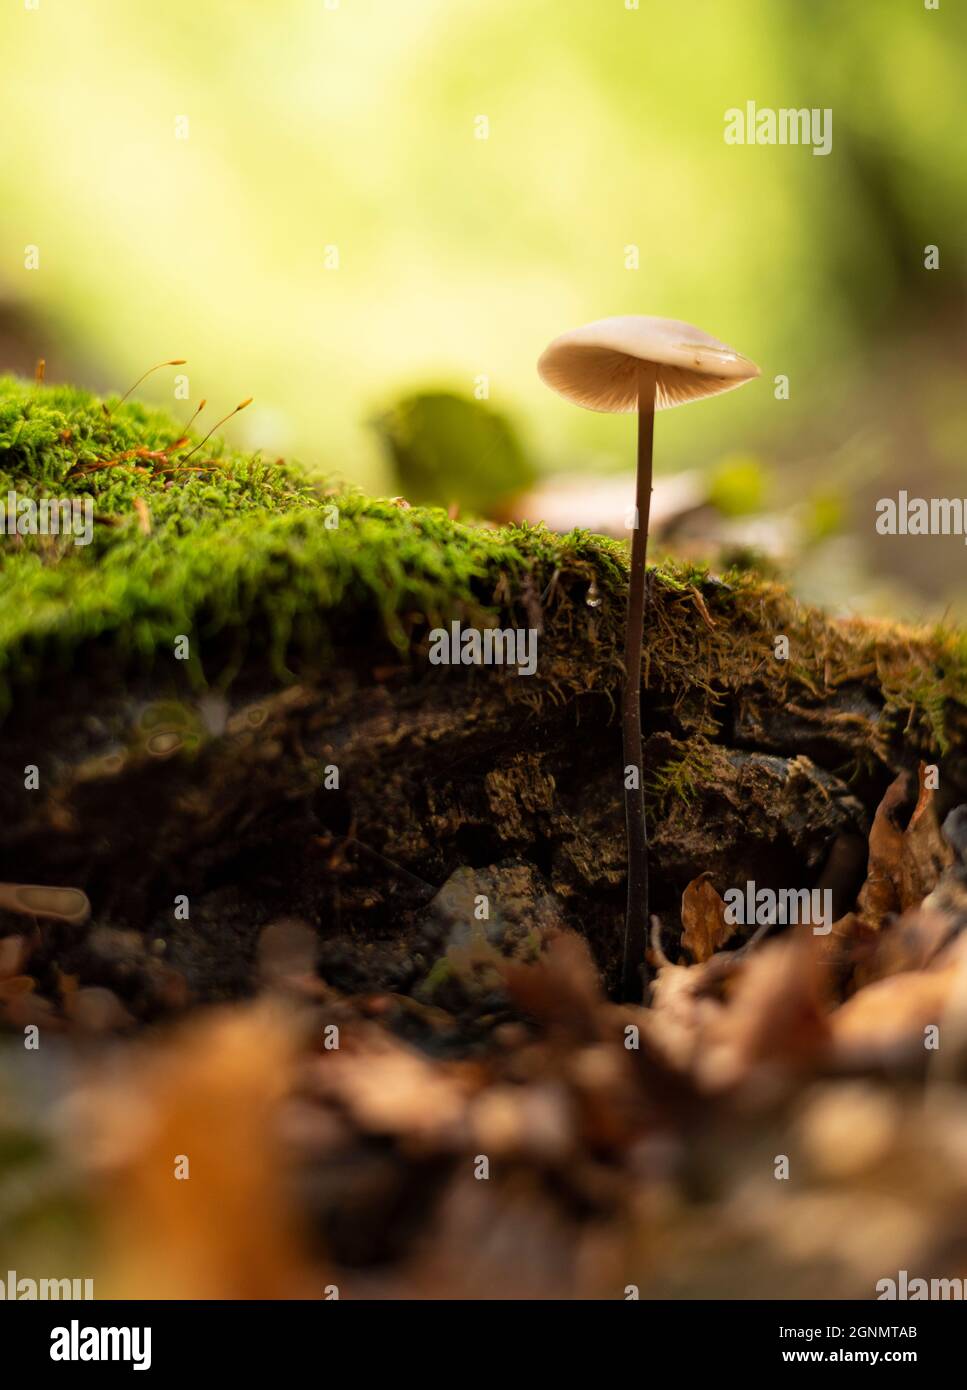 Close up photo of tiny mushroom growing in autumn forest Stock Photo